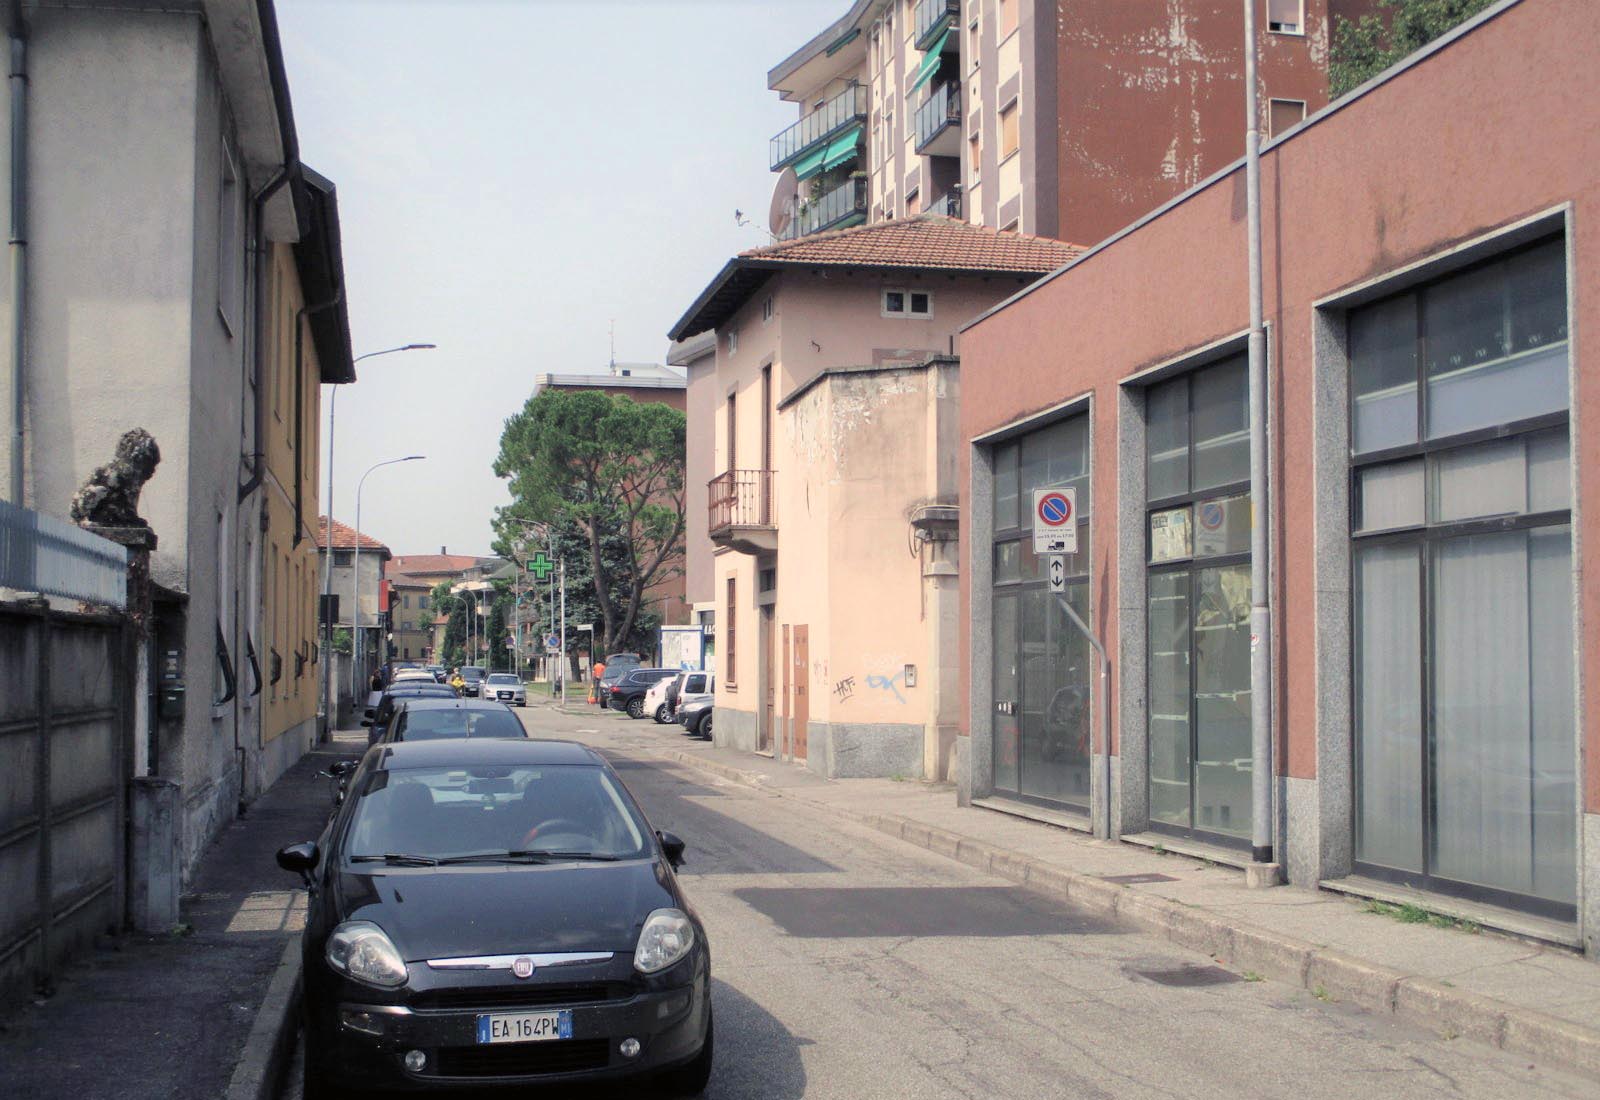 Residential buildings in Tavecchia street in Rho - View from Tavecchia street